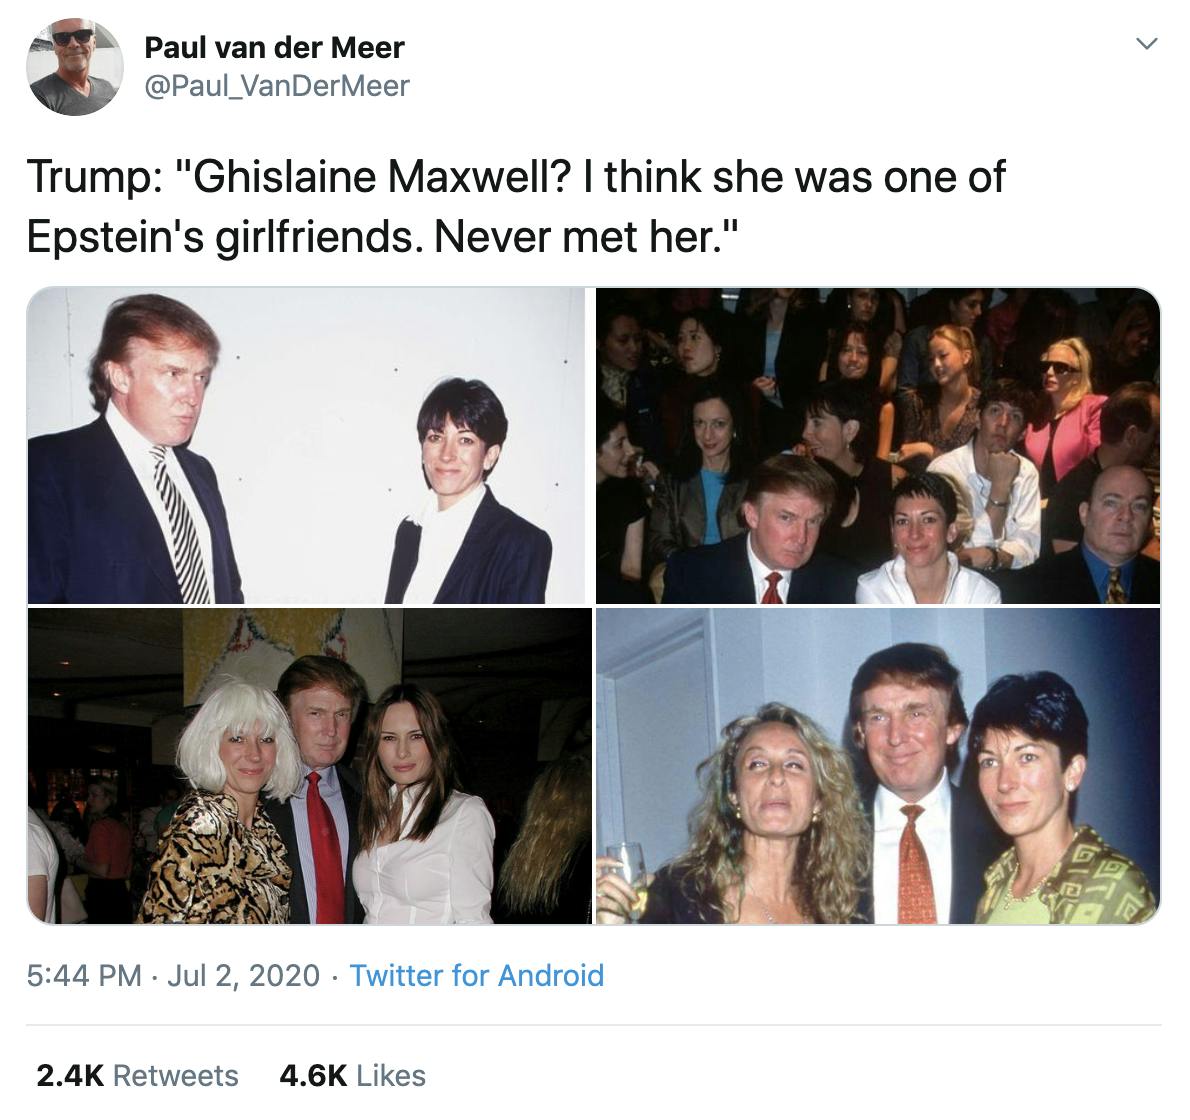 "Trump: "Ghislaine Maxwell? I think she was one of Epstein's girlfriends. Never met her." images of Epstein with Trump